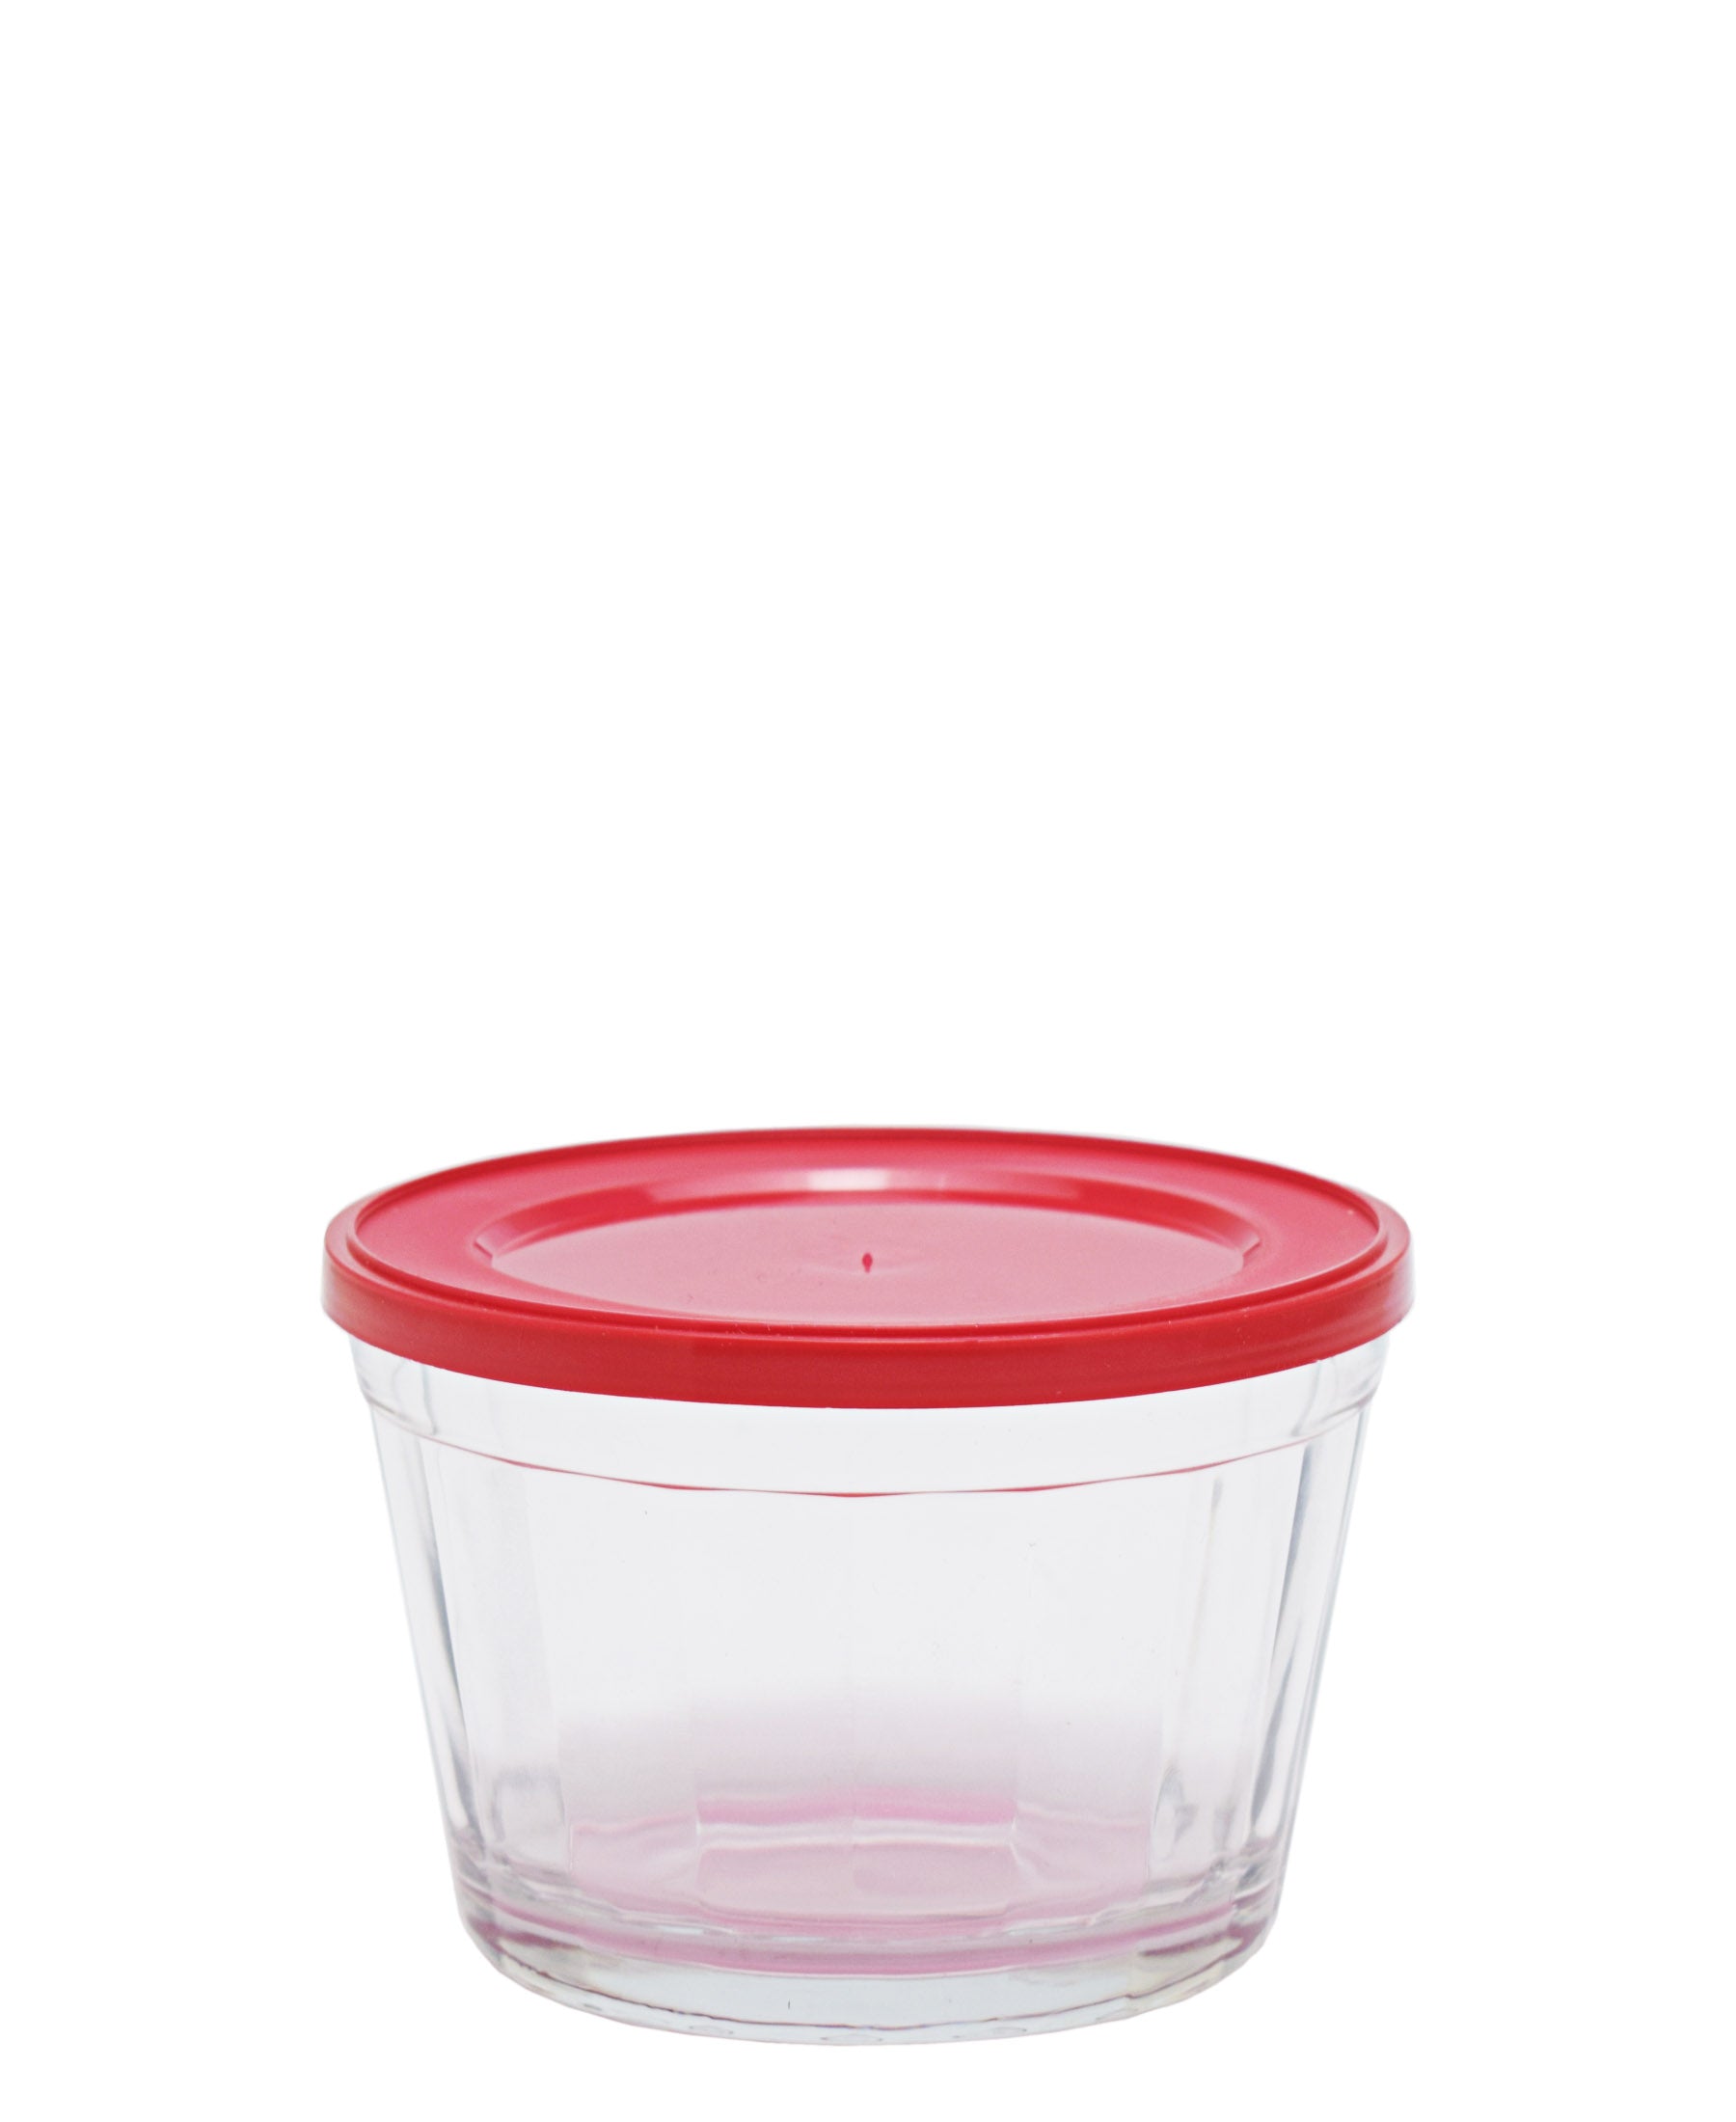 American 600ml Cup Bowl with Plastic Lid - Red